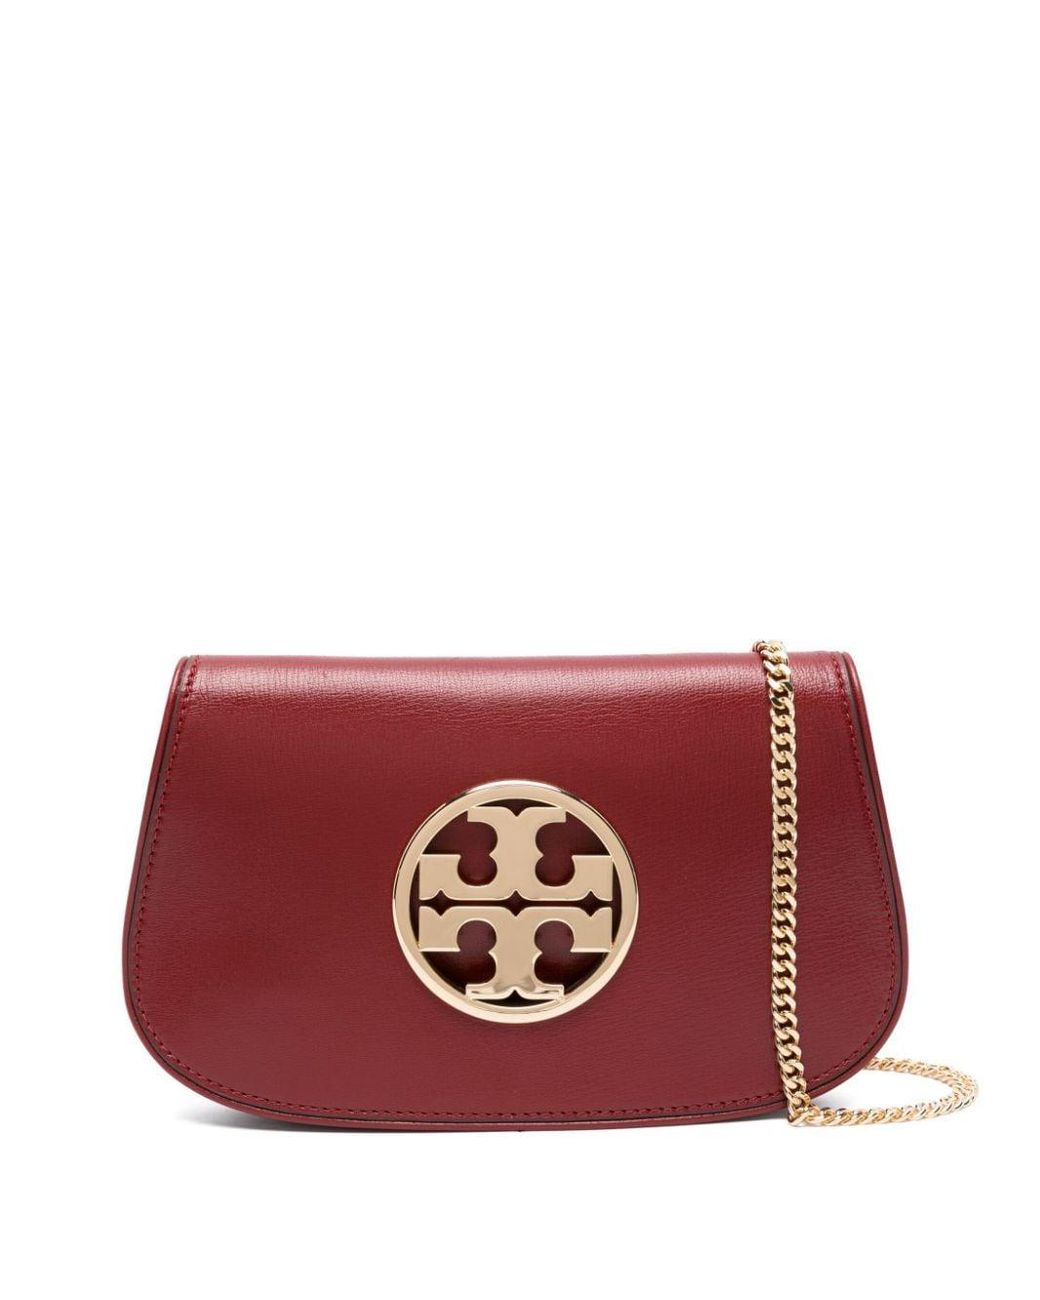 Tory Burch Reva Double T Leather Shoulder Bag in Red | Lyst